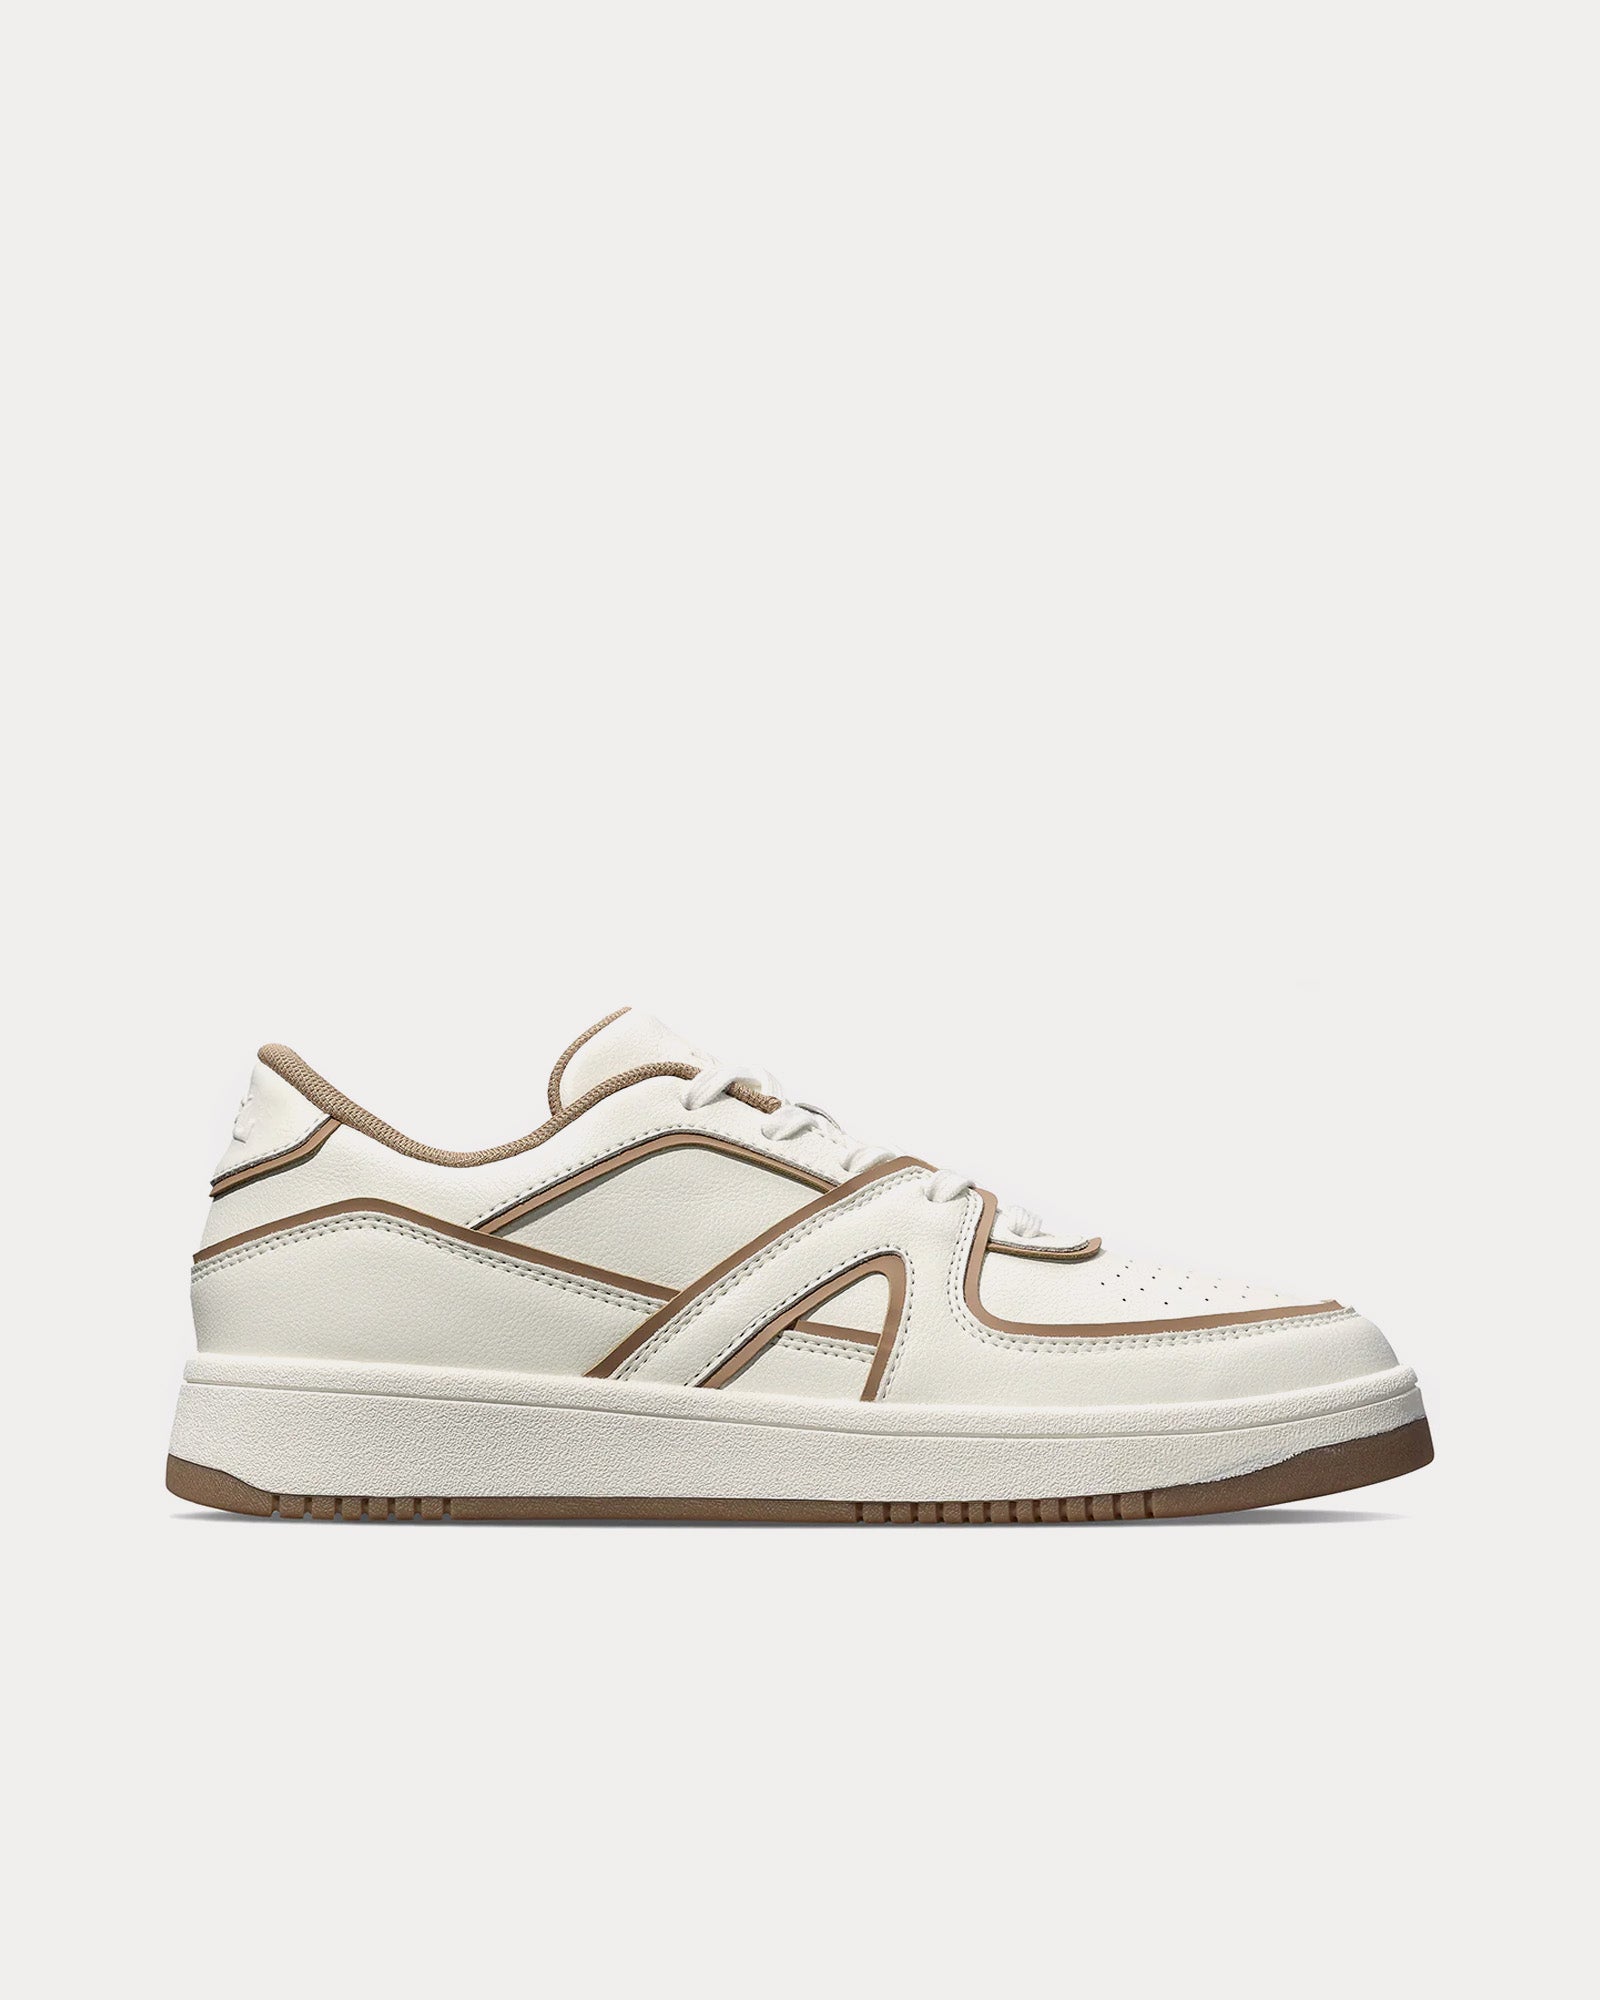 Athletic Propulsion Labs - Nostalgia '87 Ivory / Gum Low Top Sneakers